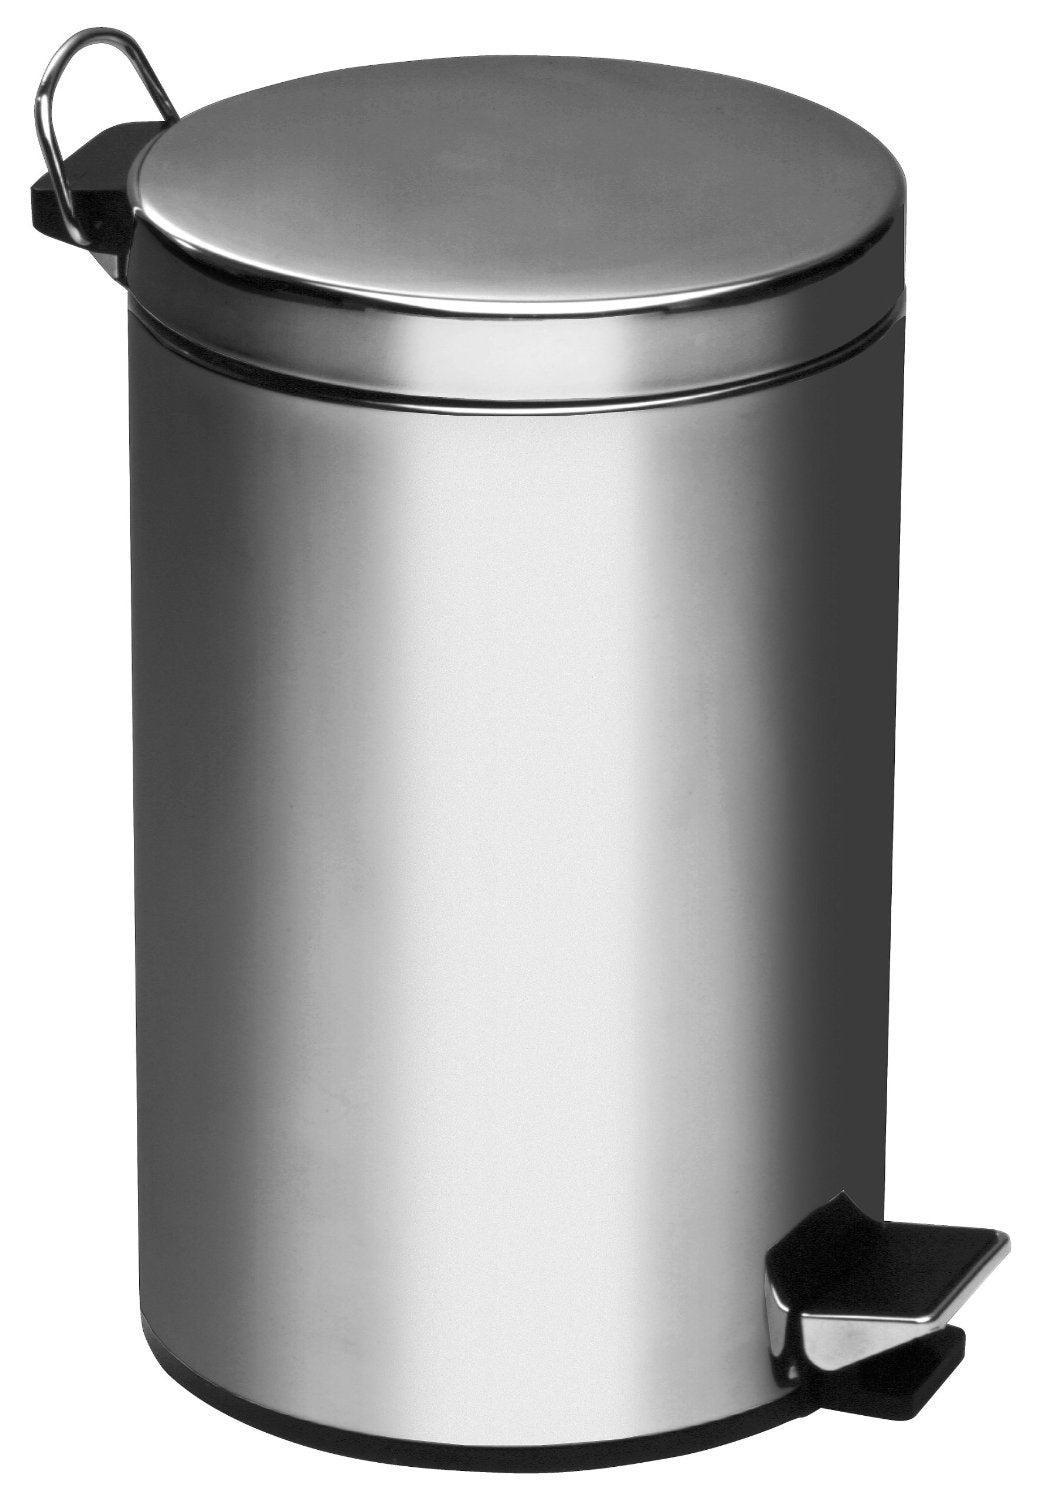 Queen Stainless Steel Pedal Bin 20L Q-60701 - Double Bay Hardware